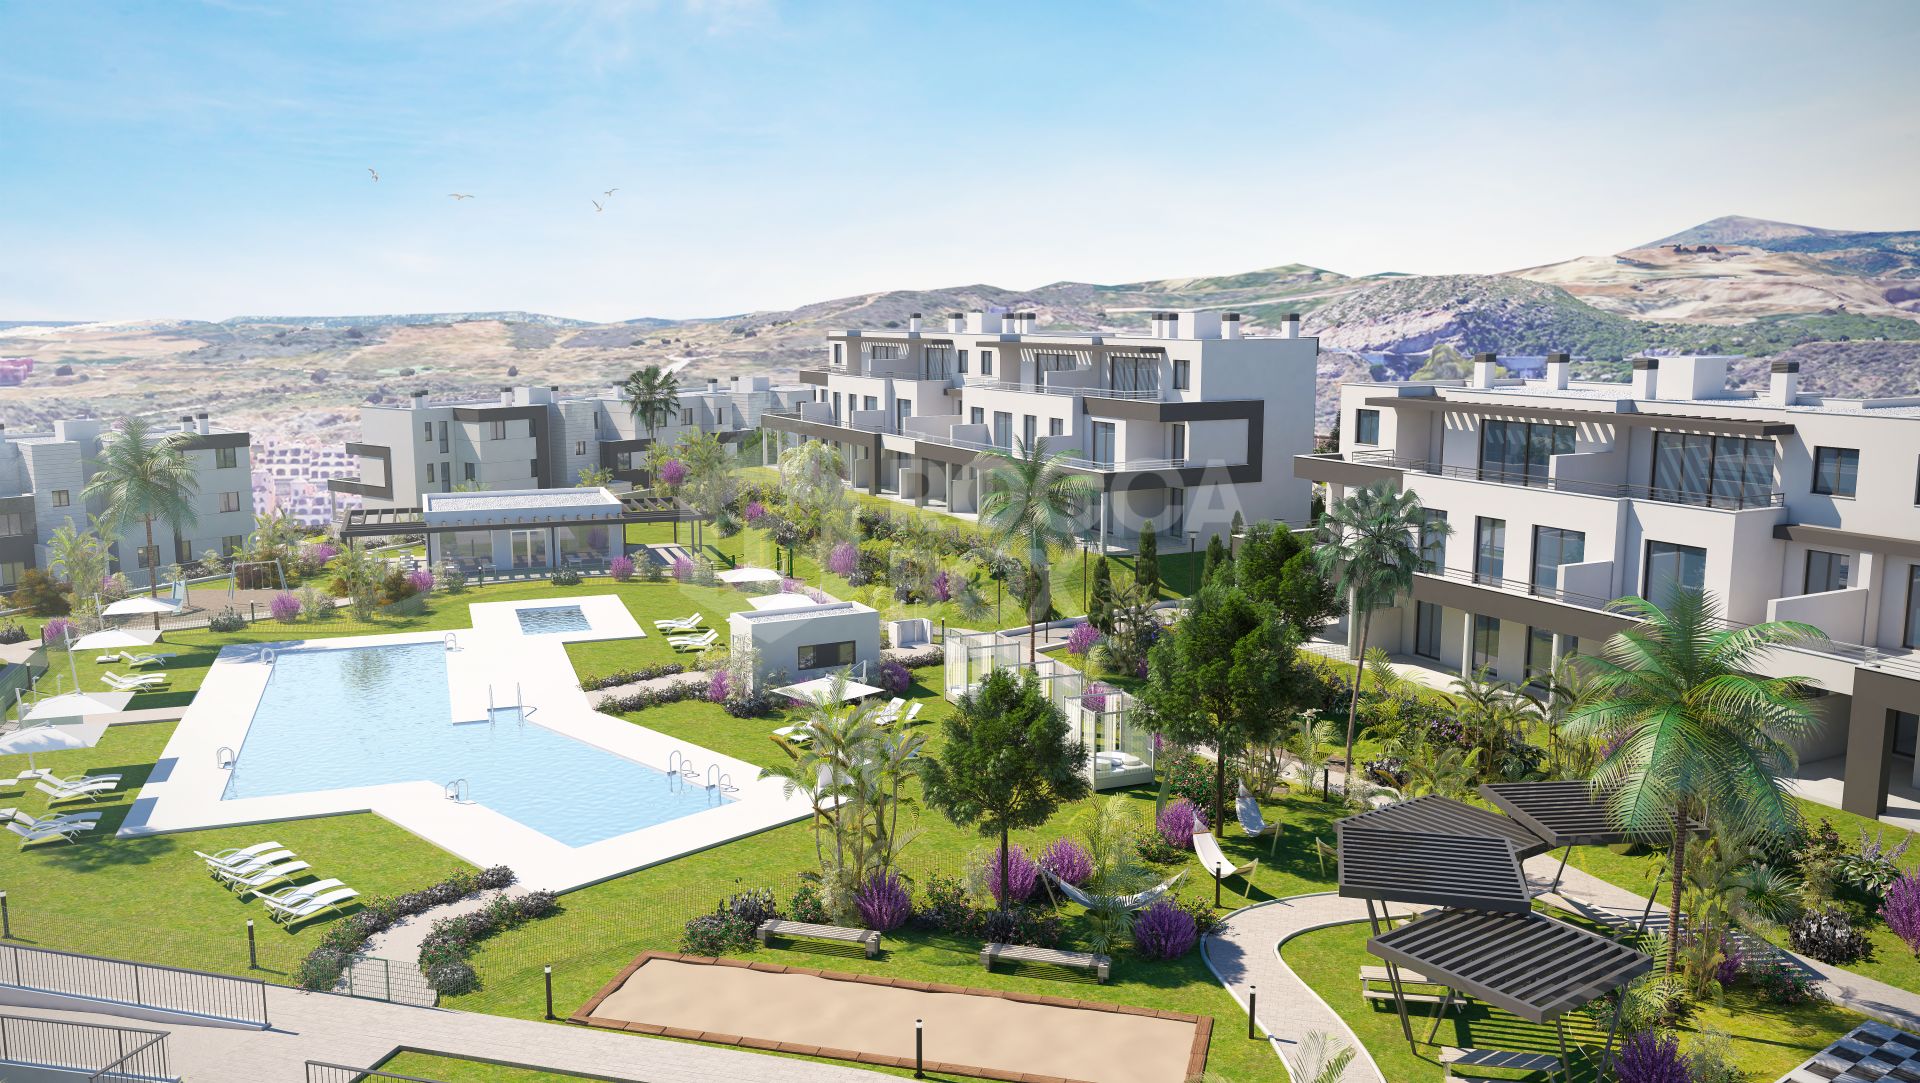 Discover Modern Living with Stunning Views at Valle Romano Golf & Resort